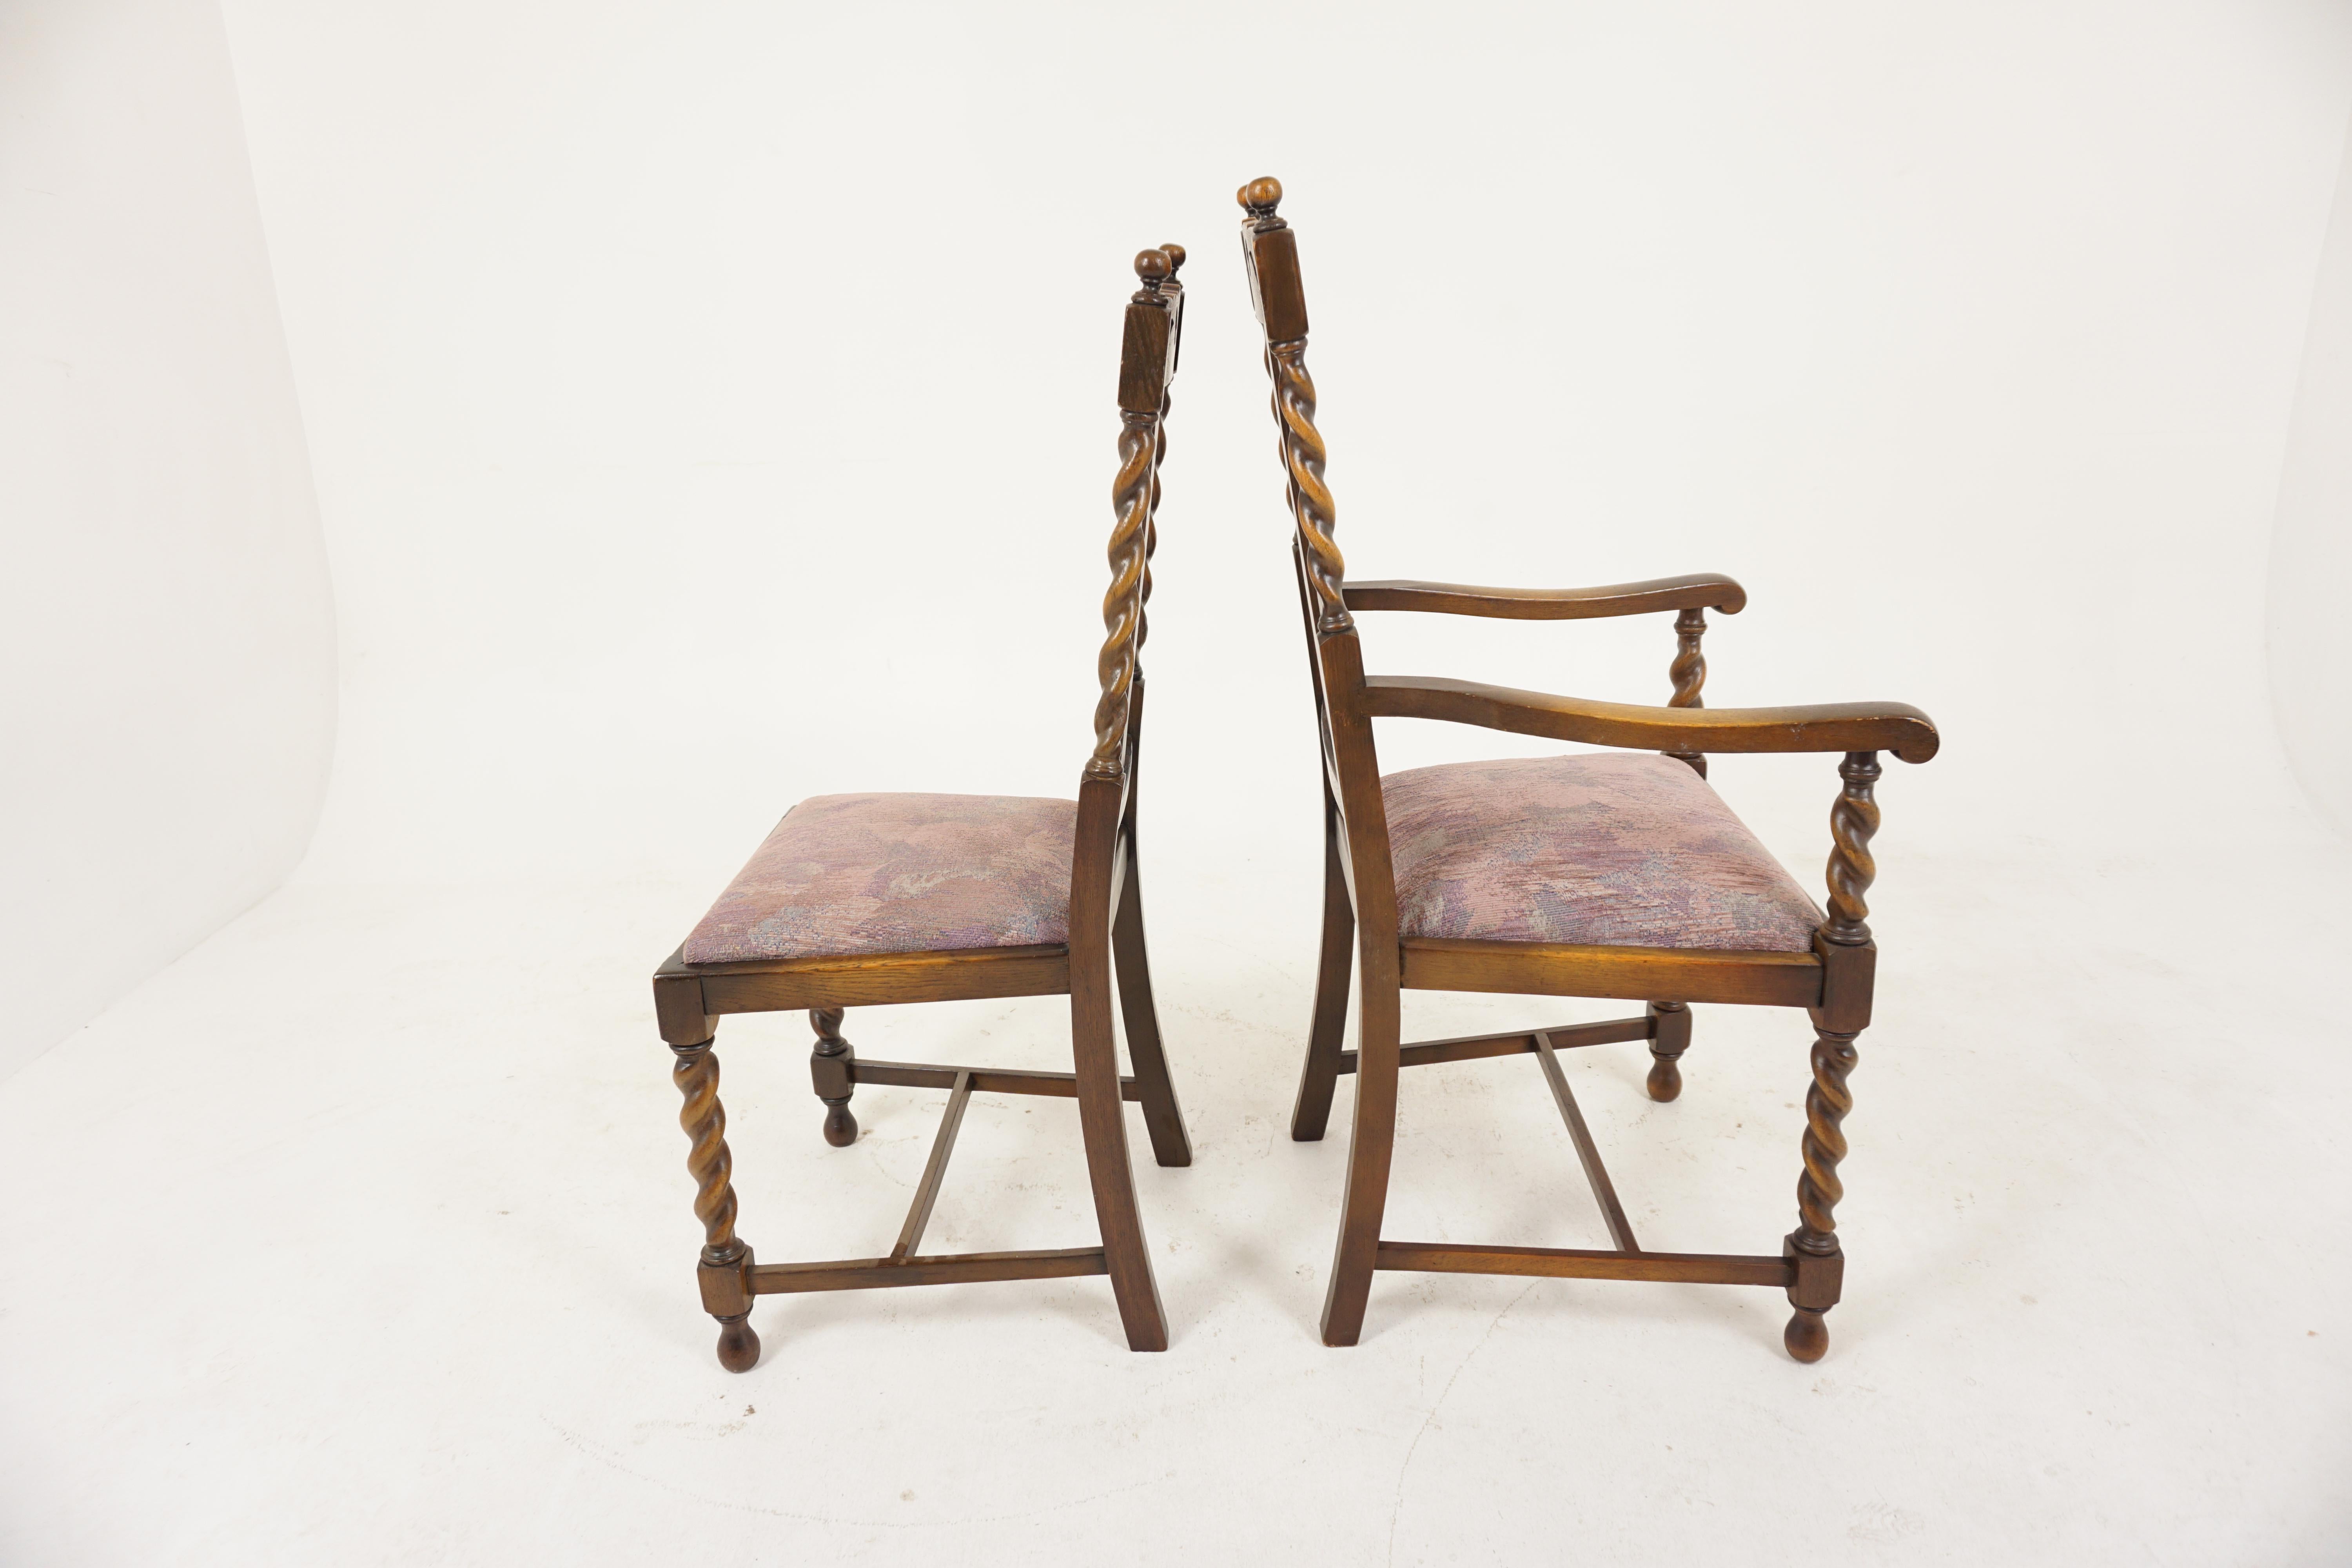 Early 20th Century Antique Barley Twist Cared Oak Dining Chairs 4+2, Scotland 1920, B2920